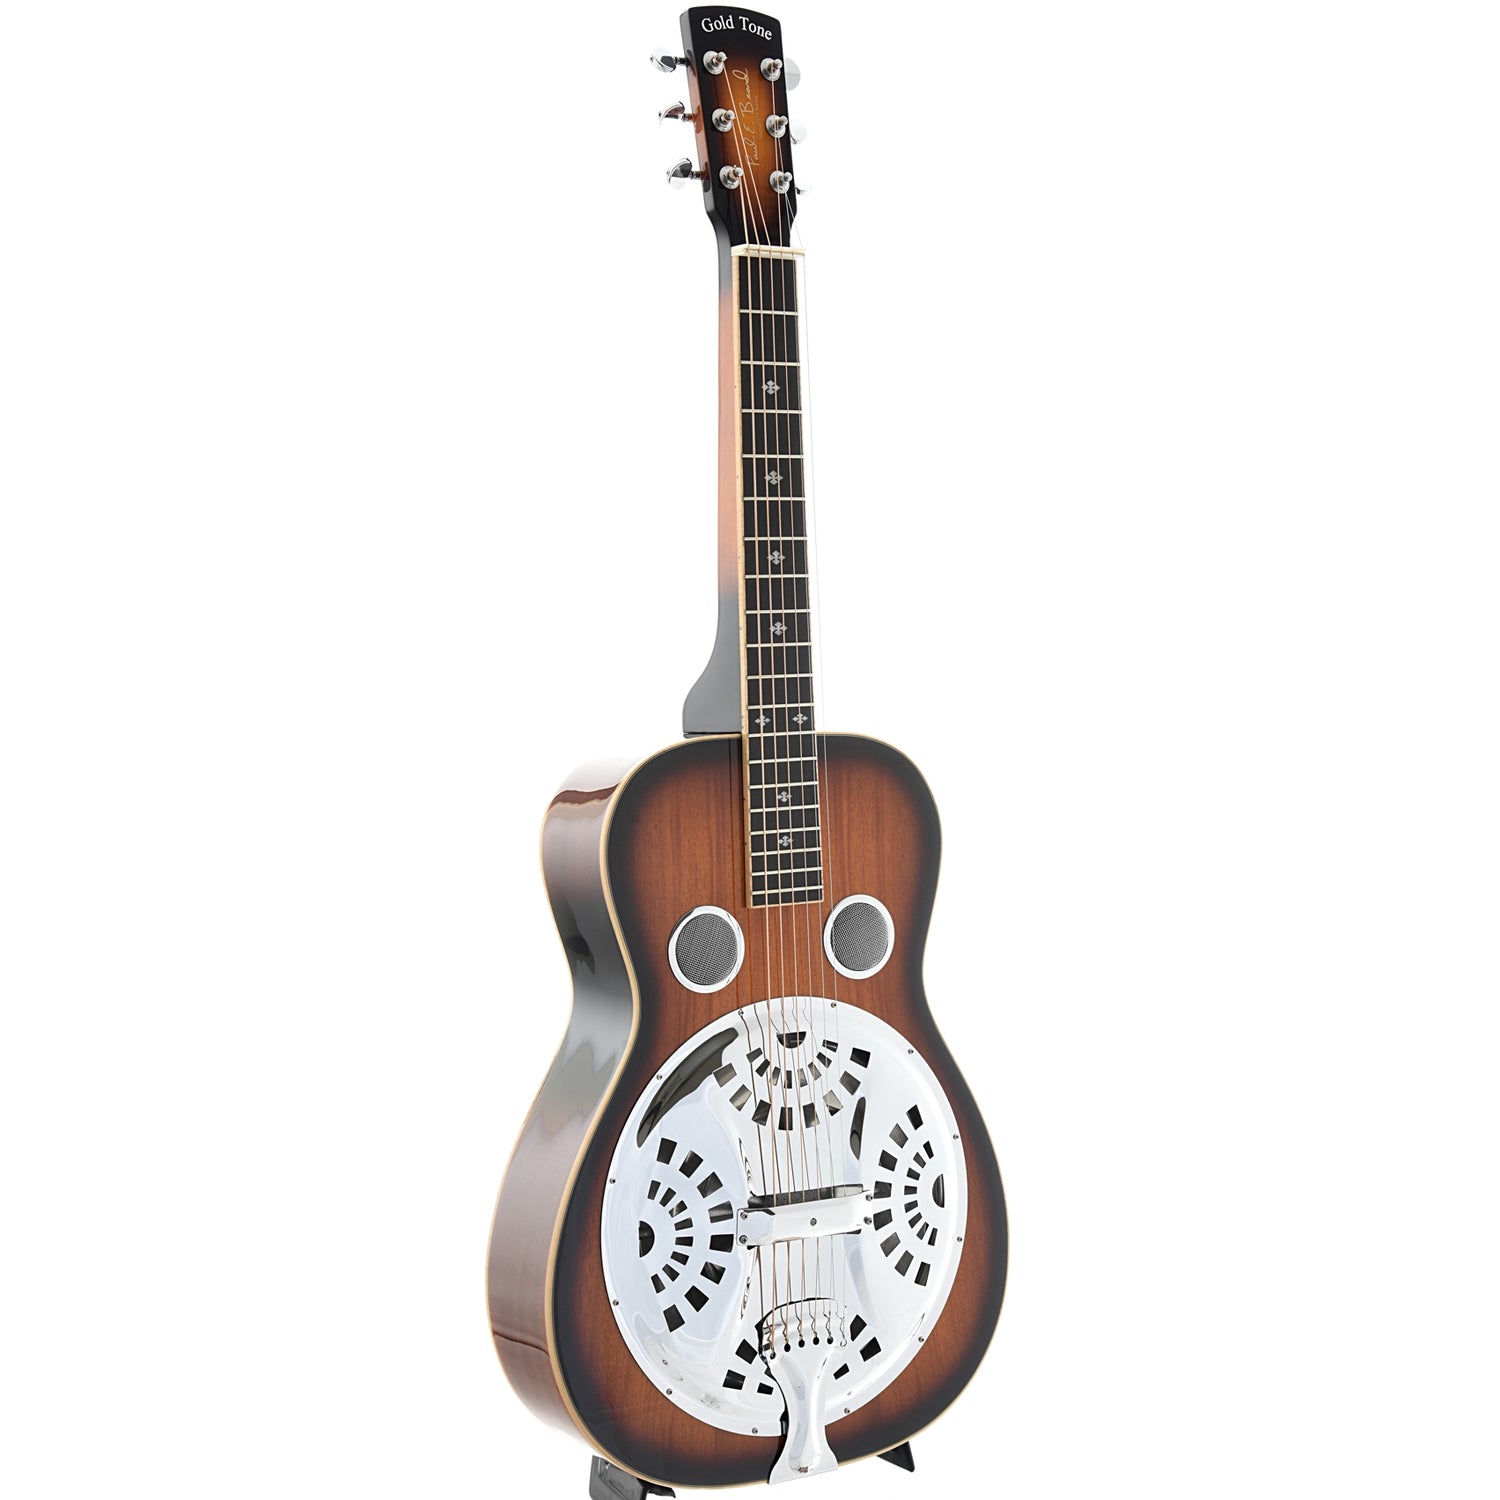 Full Front and Side of Beard Gold Tone PBS-M Solid Mahogany, Squareneck Resonator Guitar 